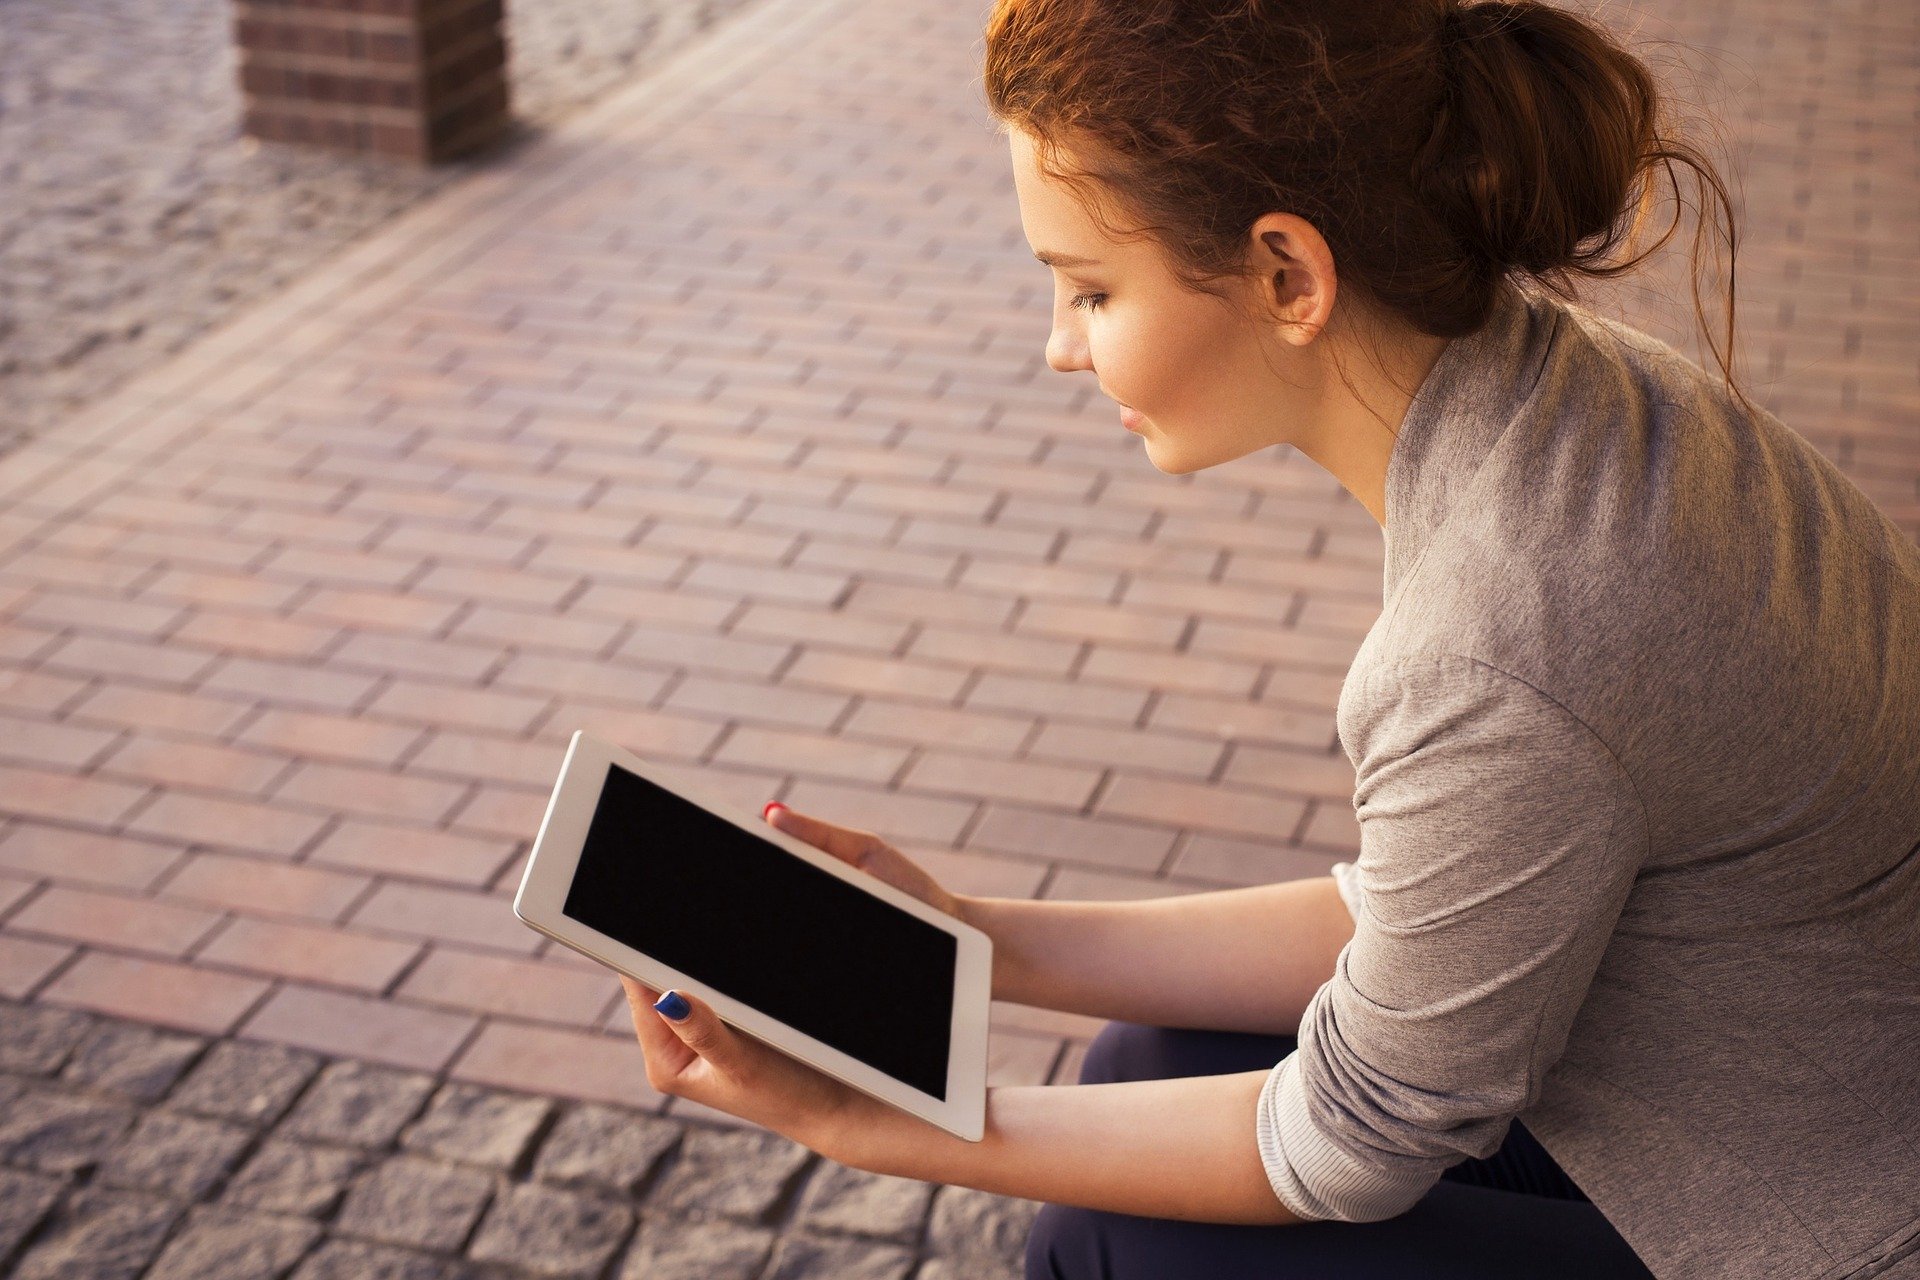  A young woman is reading a novel on her tablet while sitting on a bench.